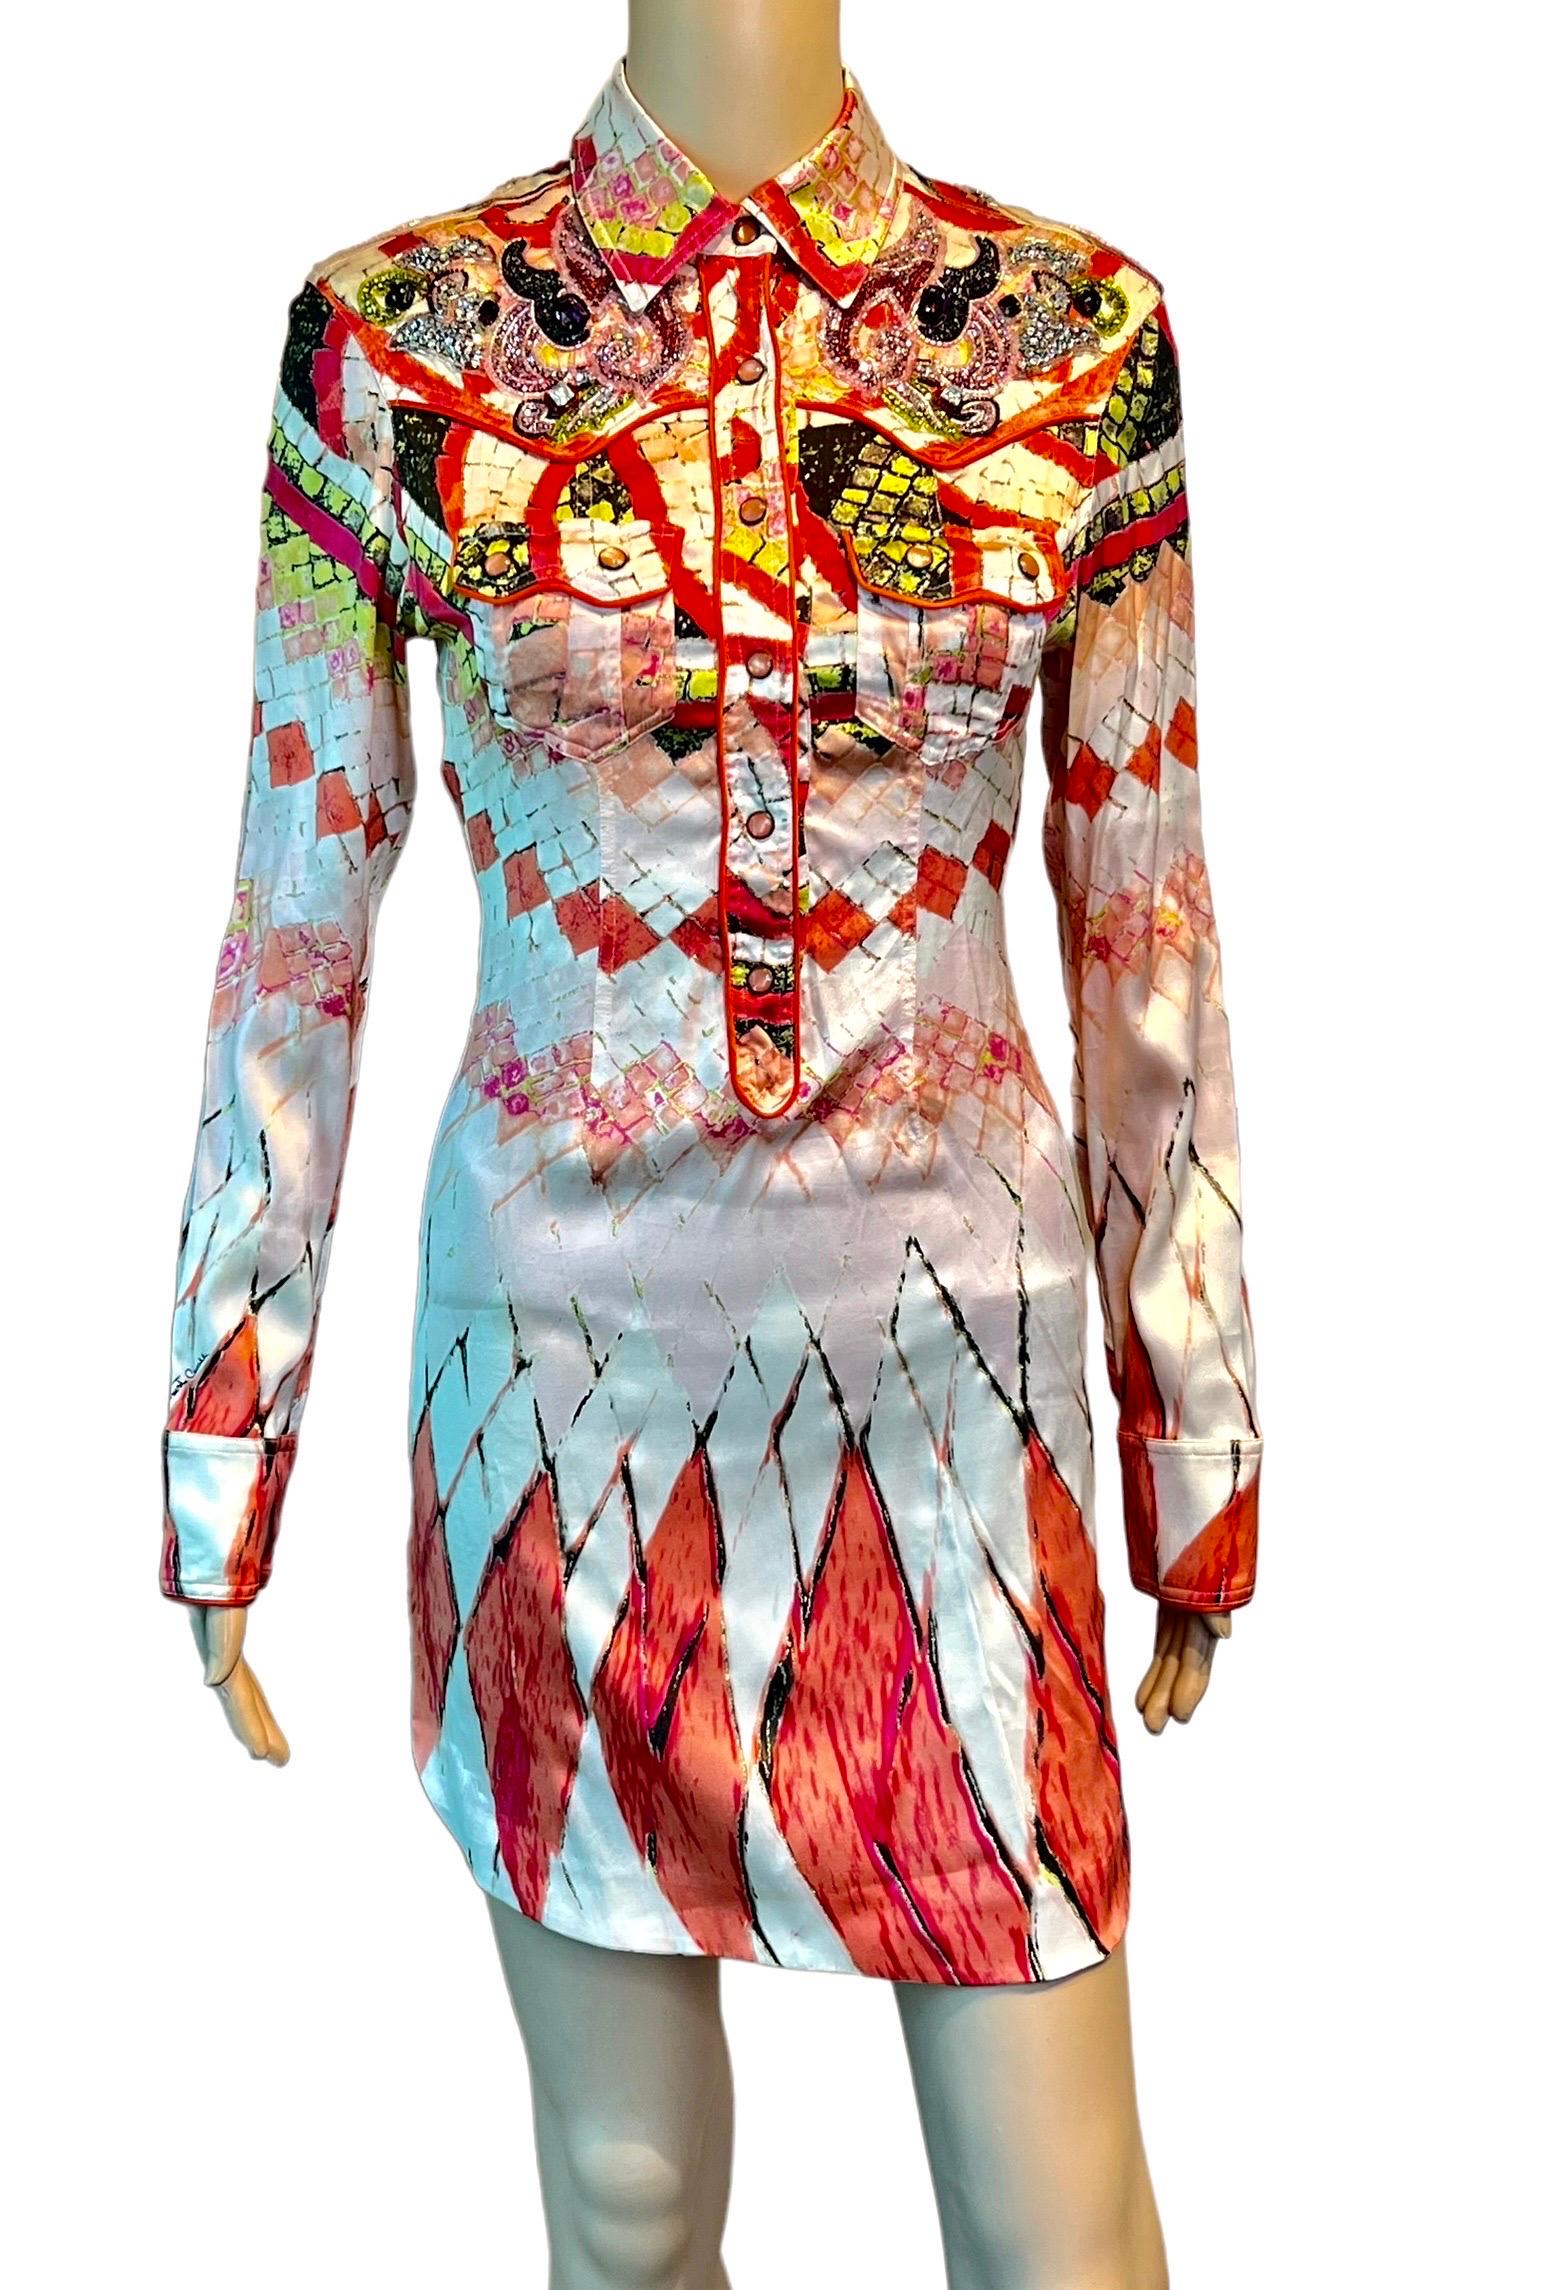 Roberto Cavalli S/S 2004 Runway Embellished Plunging Button Up Mini Shirt Dress In Good Condition For Sale In Naples, FL